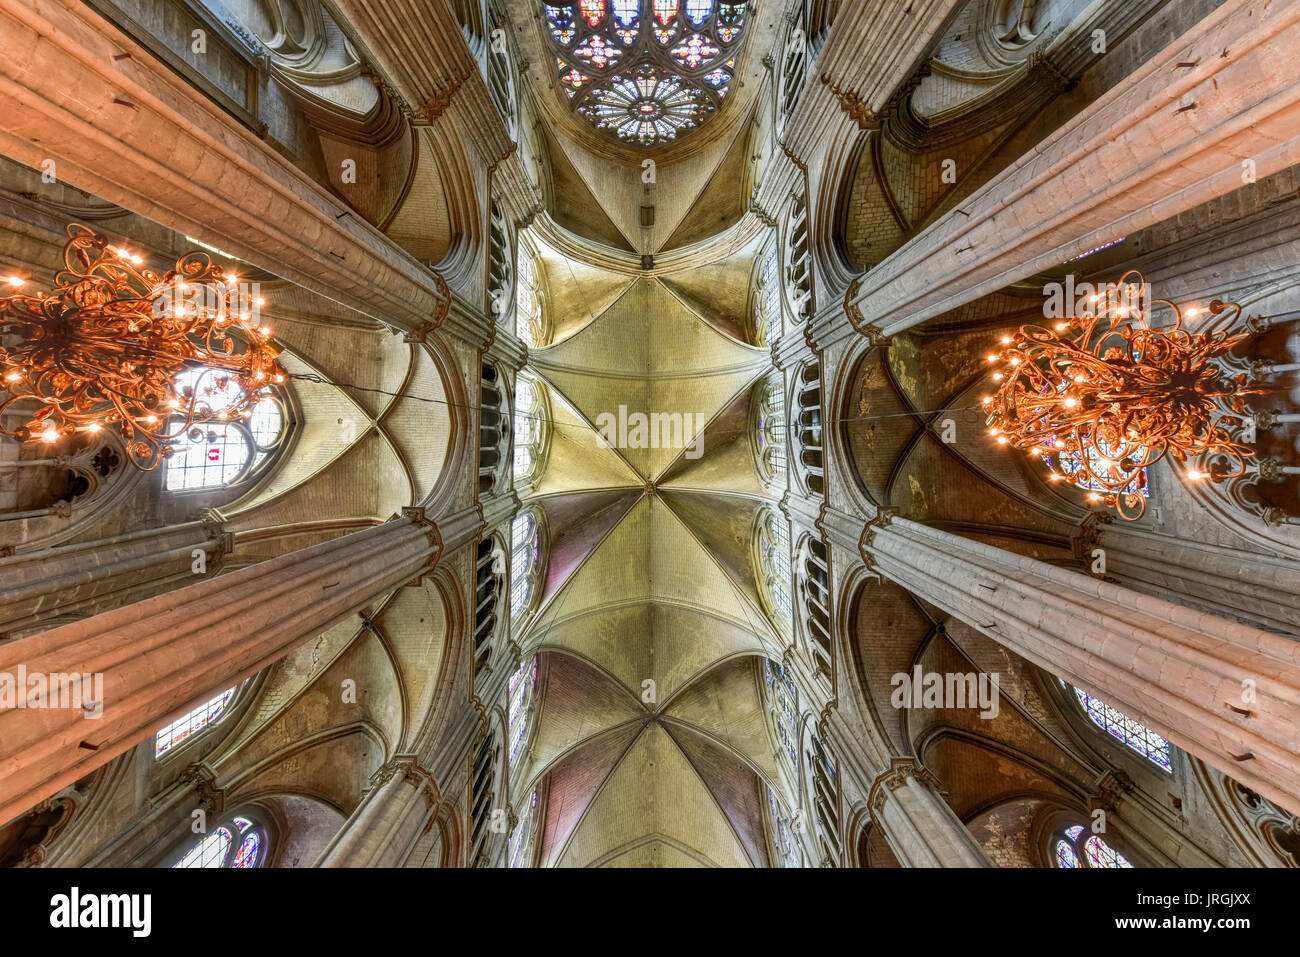 Bourges, France - May 21, 2017: Bourges Cathedral, Roman Catholic church located in Bourges, France. It is dedicated to Saint Stephen and is the seat  Stock Photo